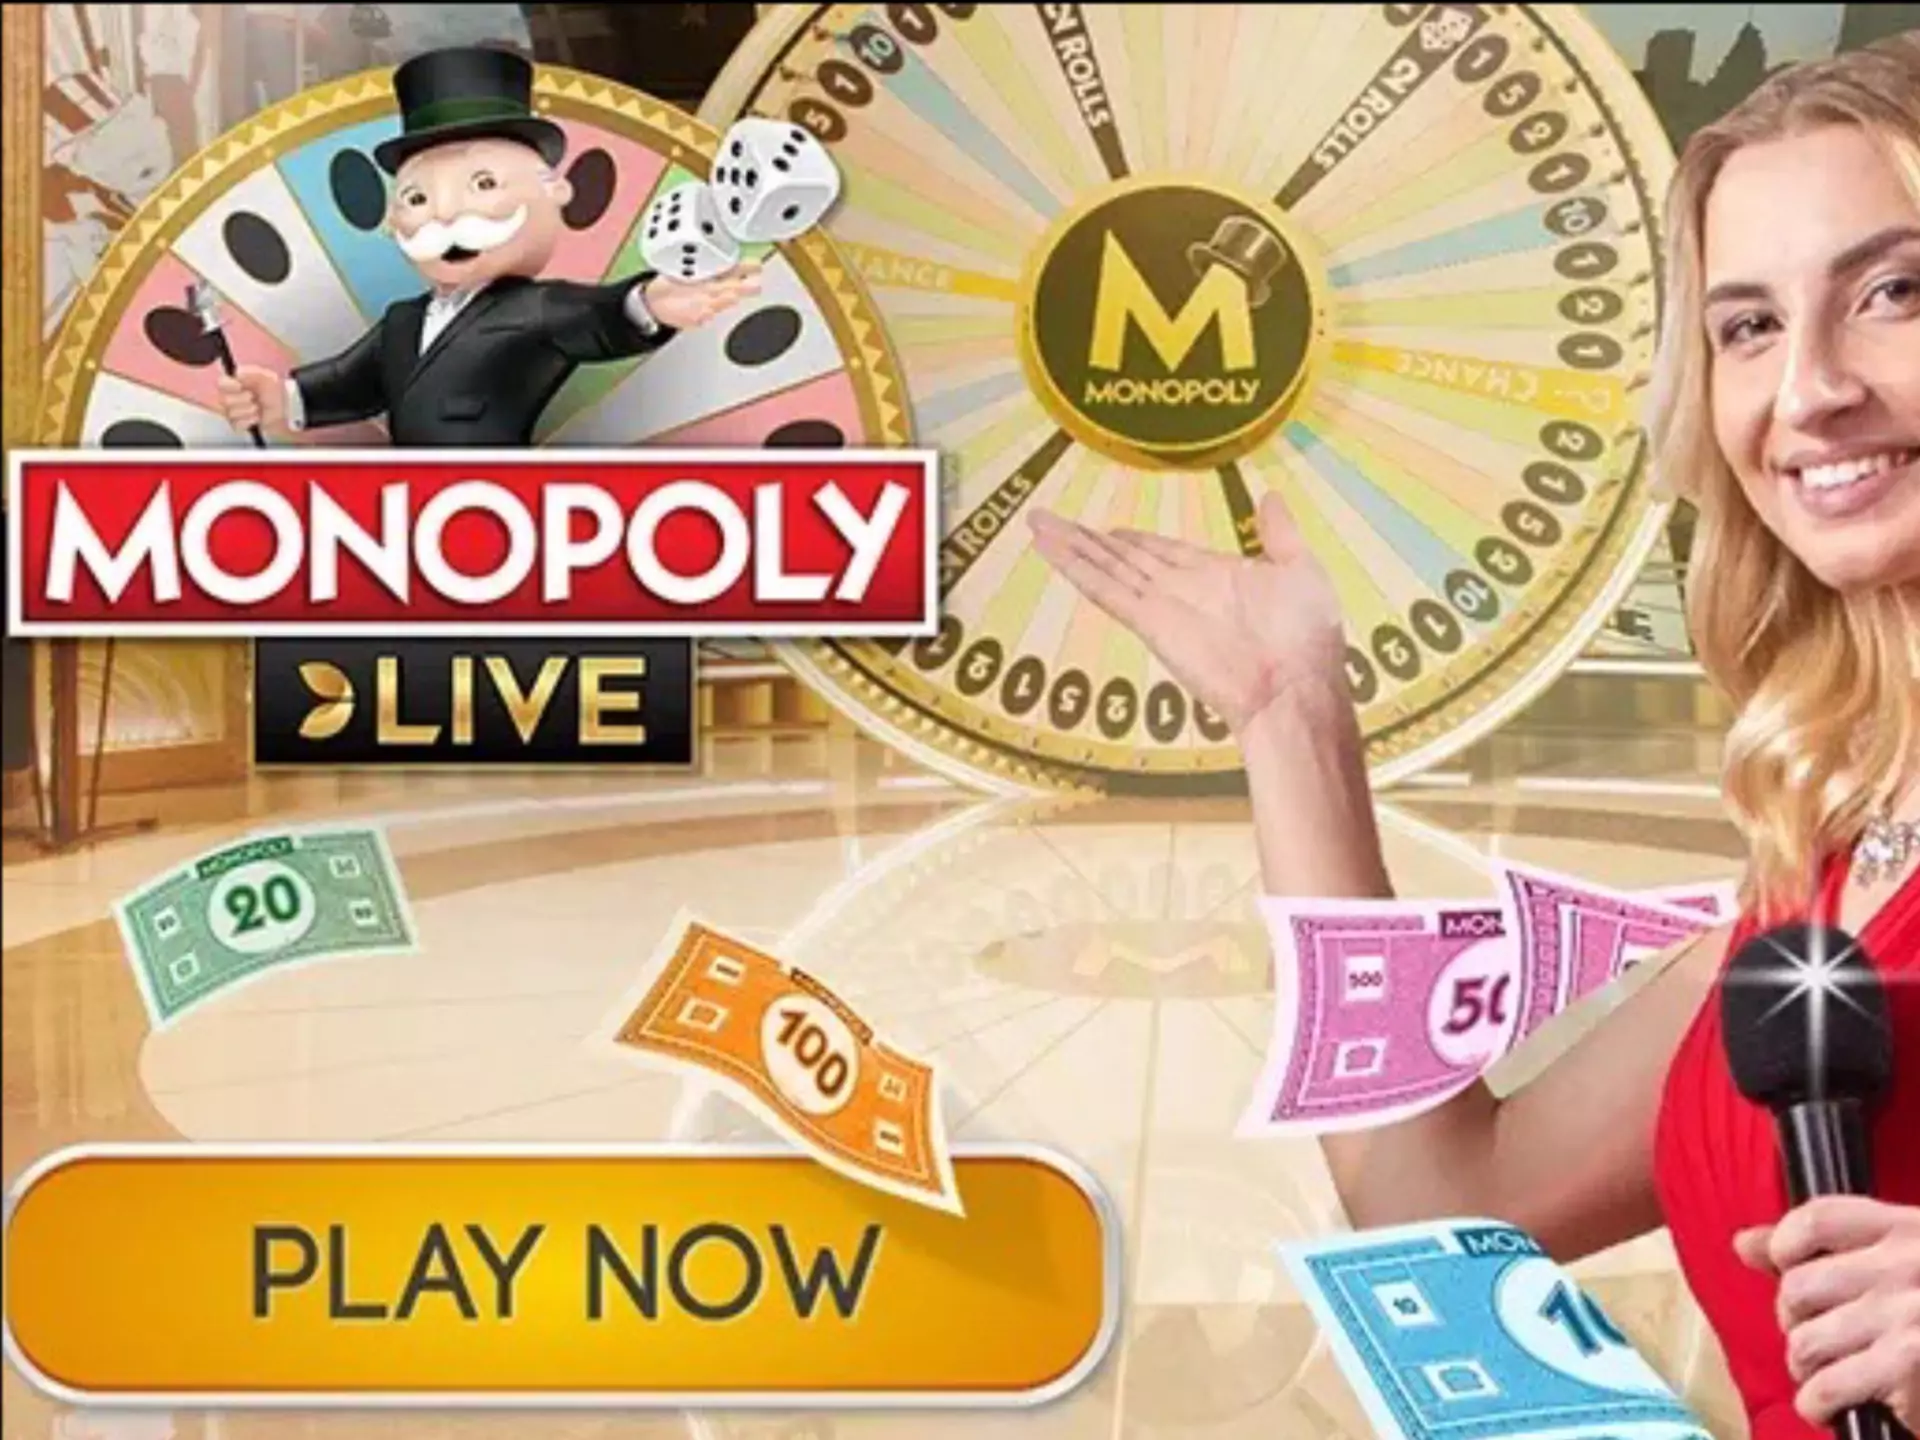 Choose the most effective strategy and play live monopoly with profit.